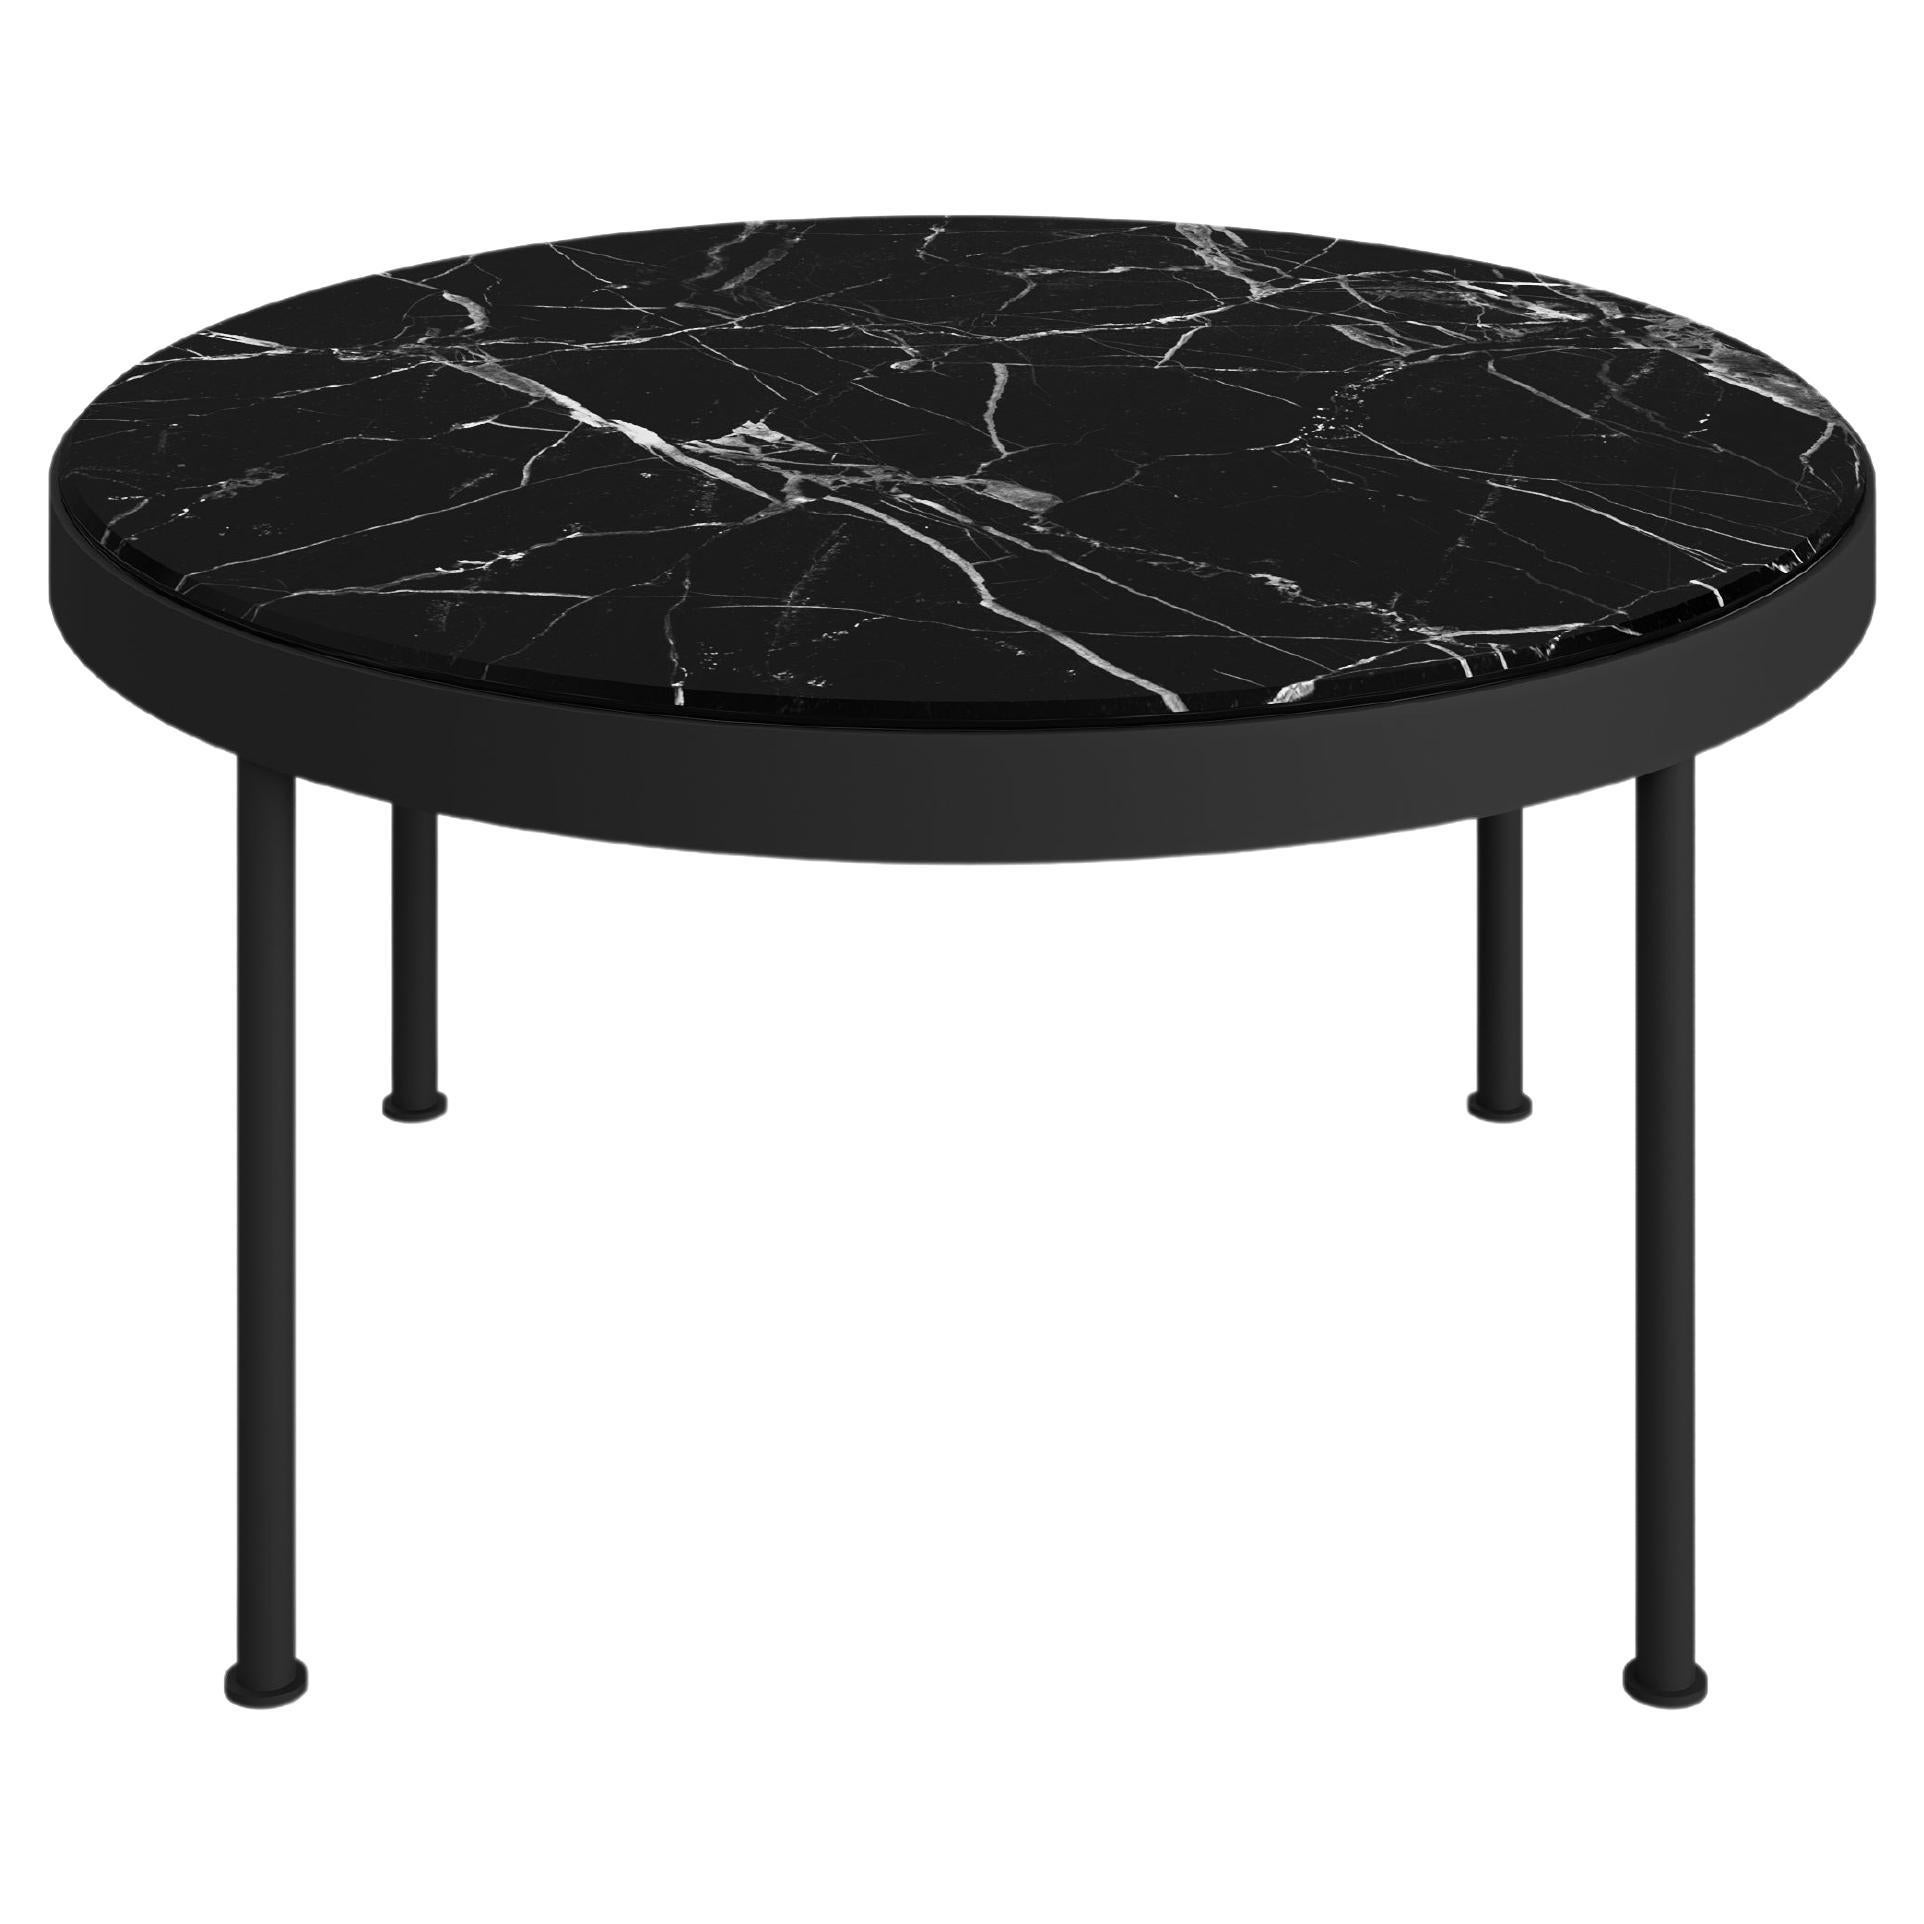 Outdoor Coffee Table in Nero Marquina Marble with Lacquered Legs